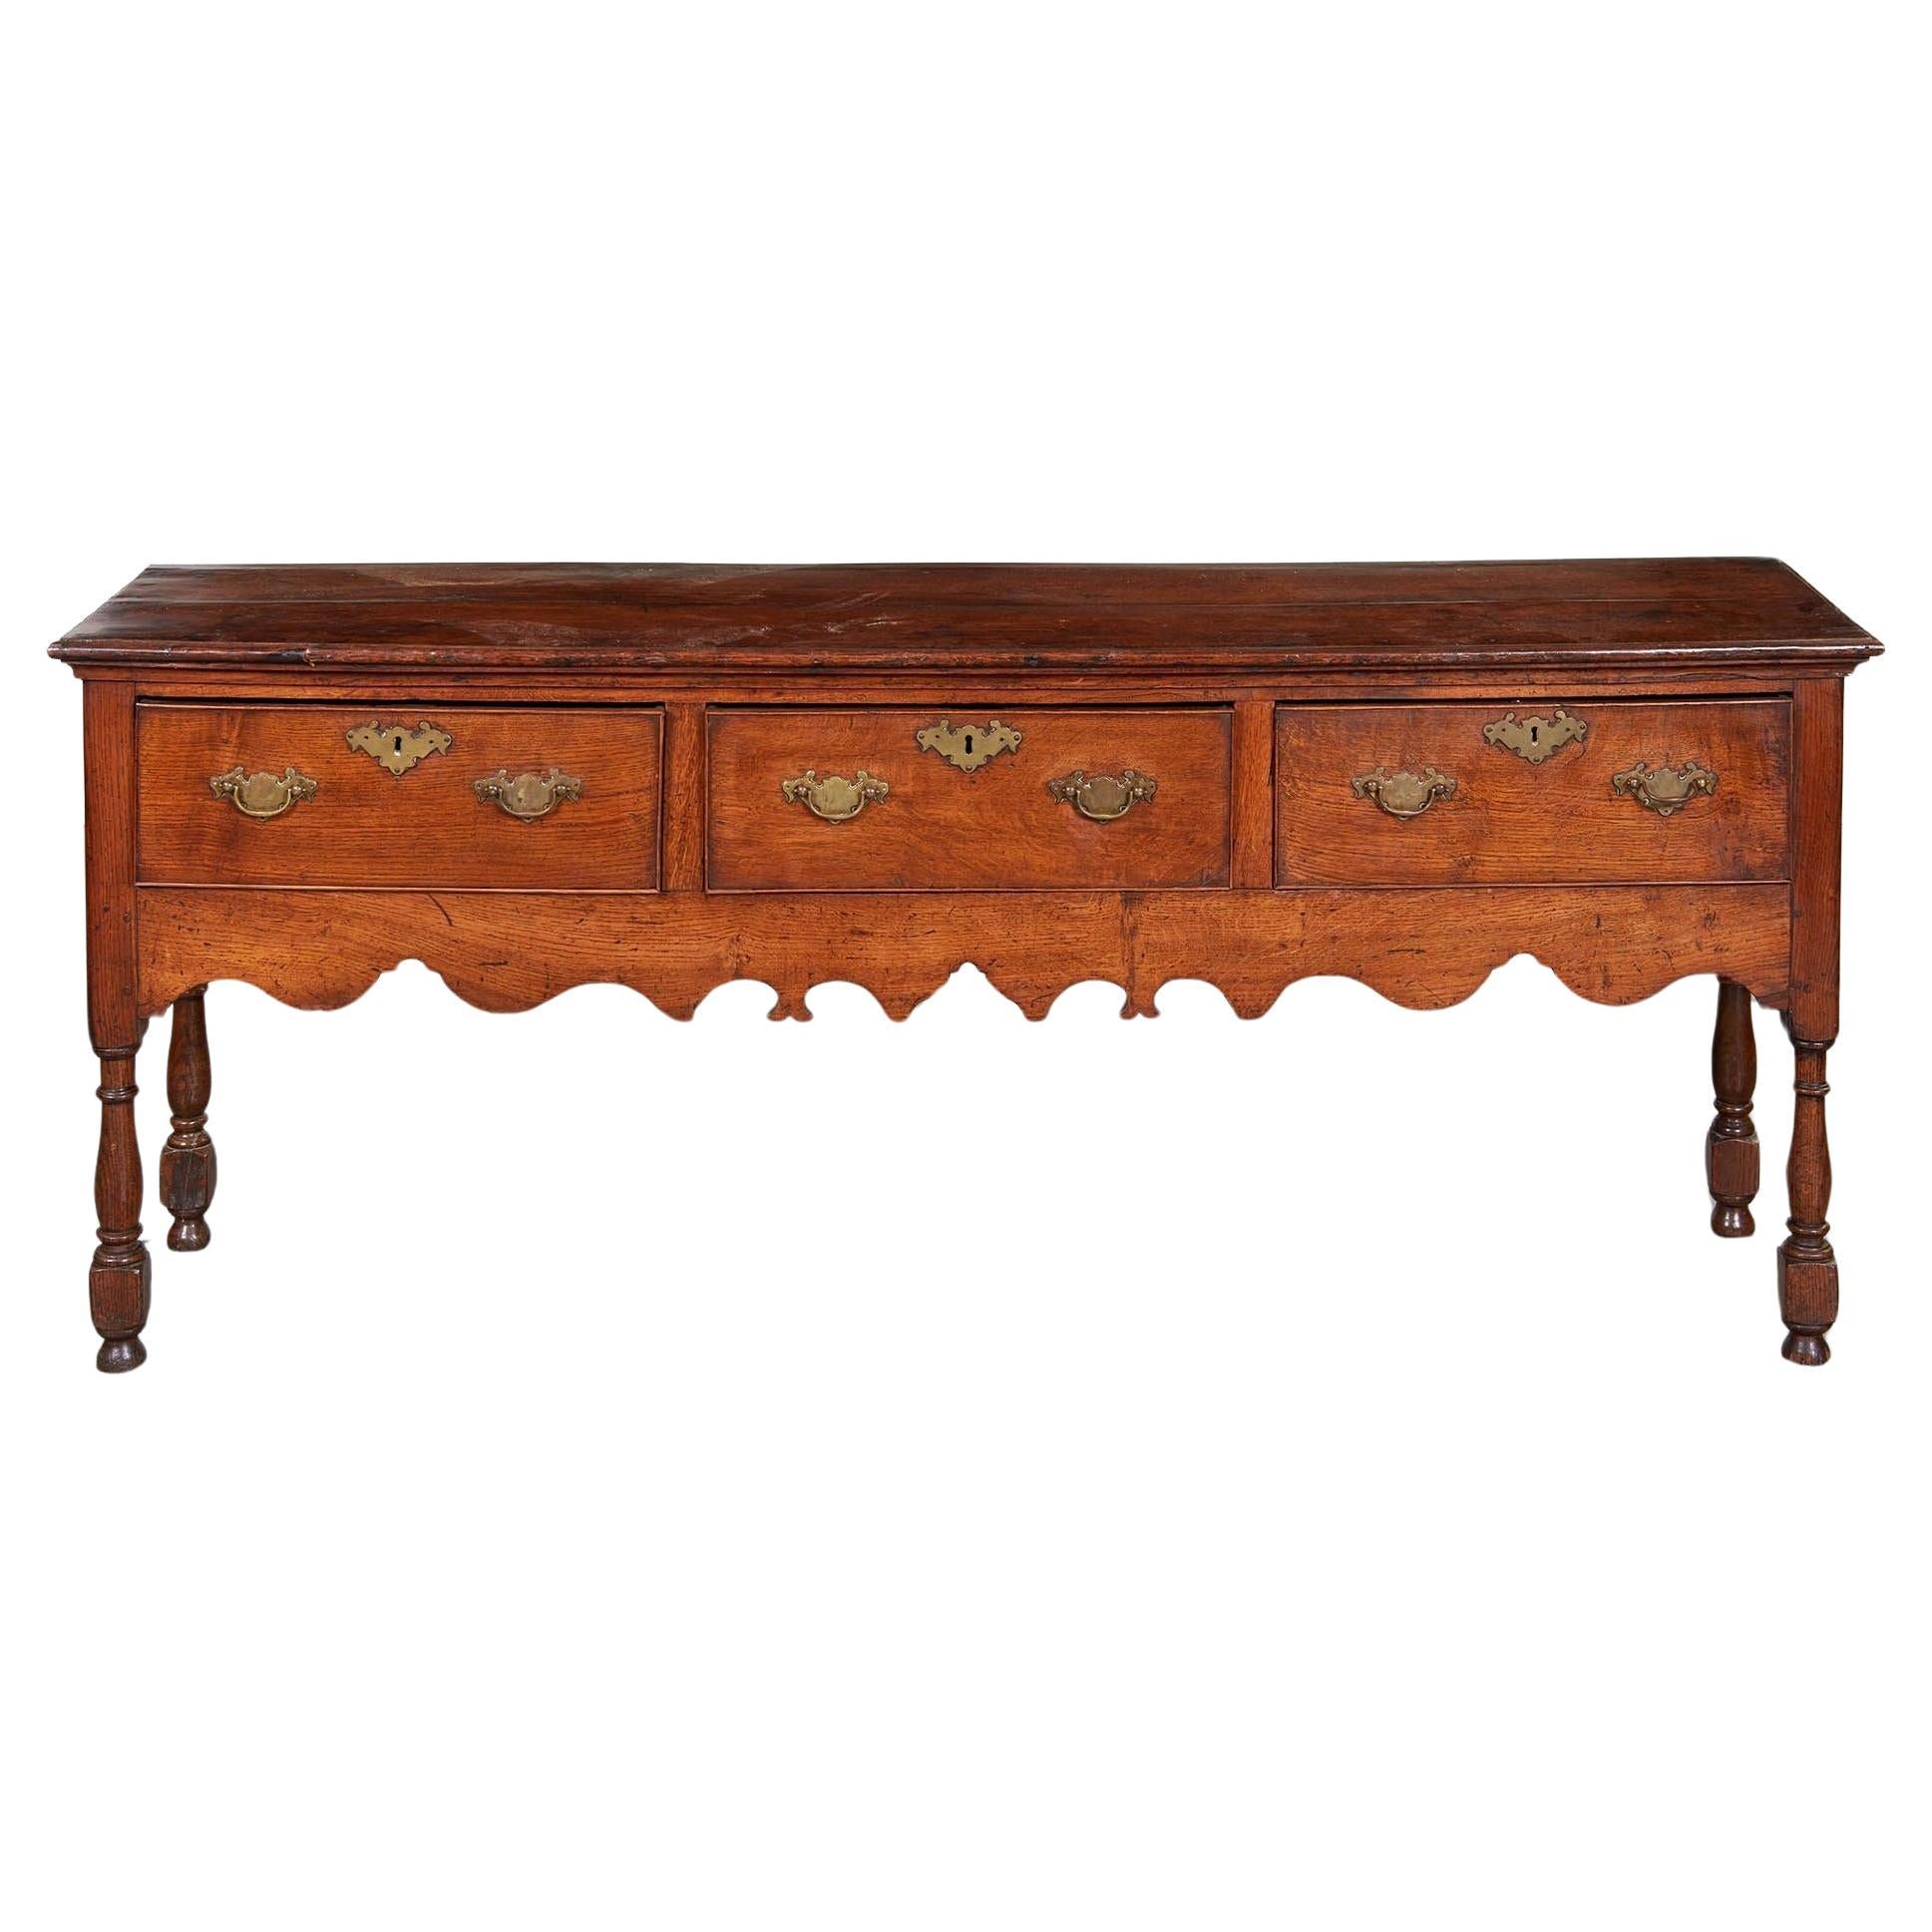 Early 18th Century English Low Dresser For Sale